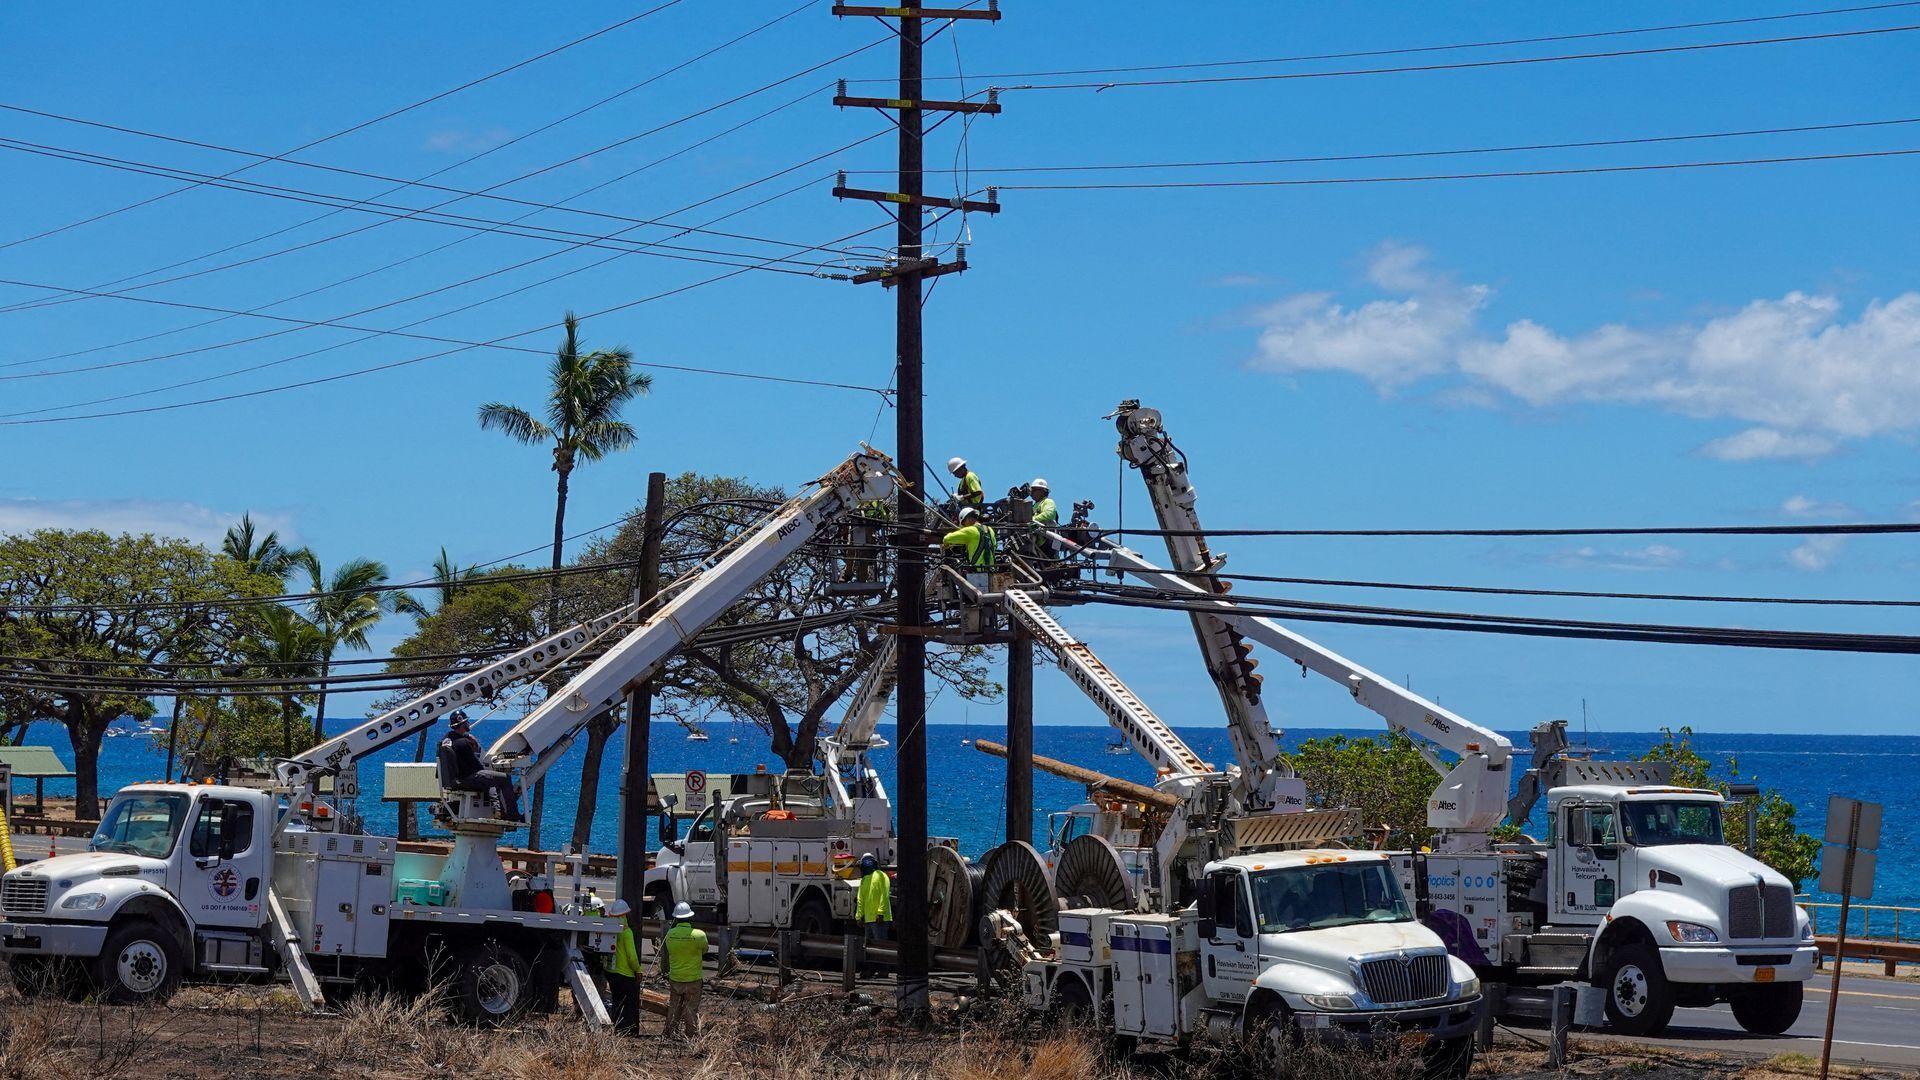 The White House announced it will allocate  million to the Hawaii power grid through the Bipartisan Infrastructure Law in response to Maui wildfires.